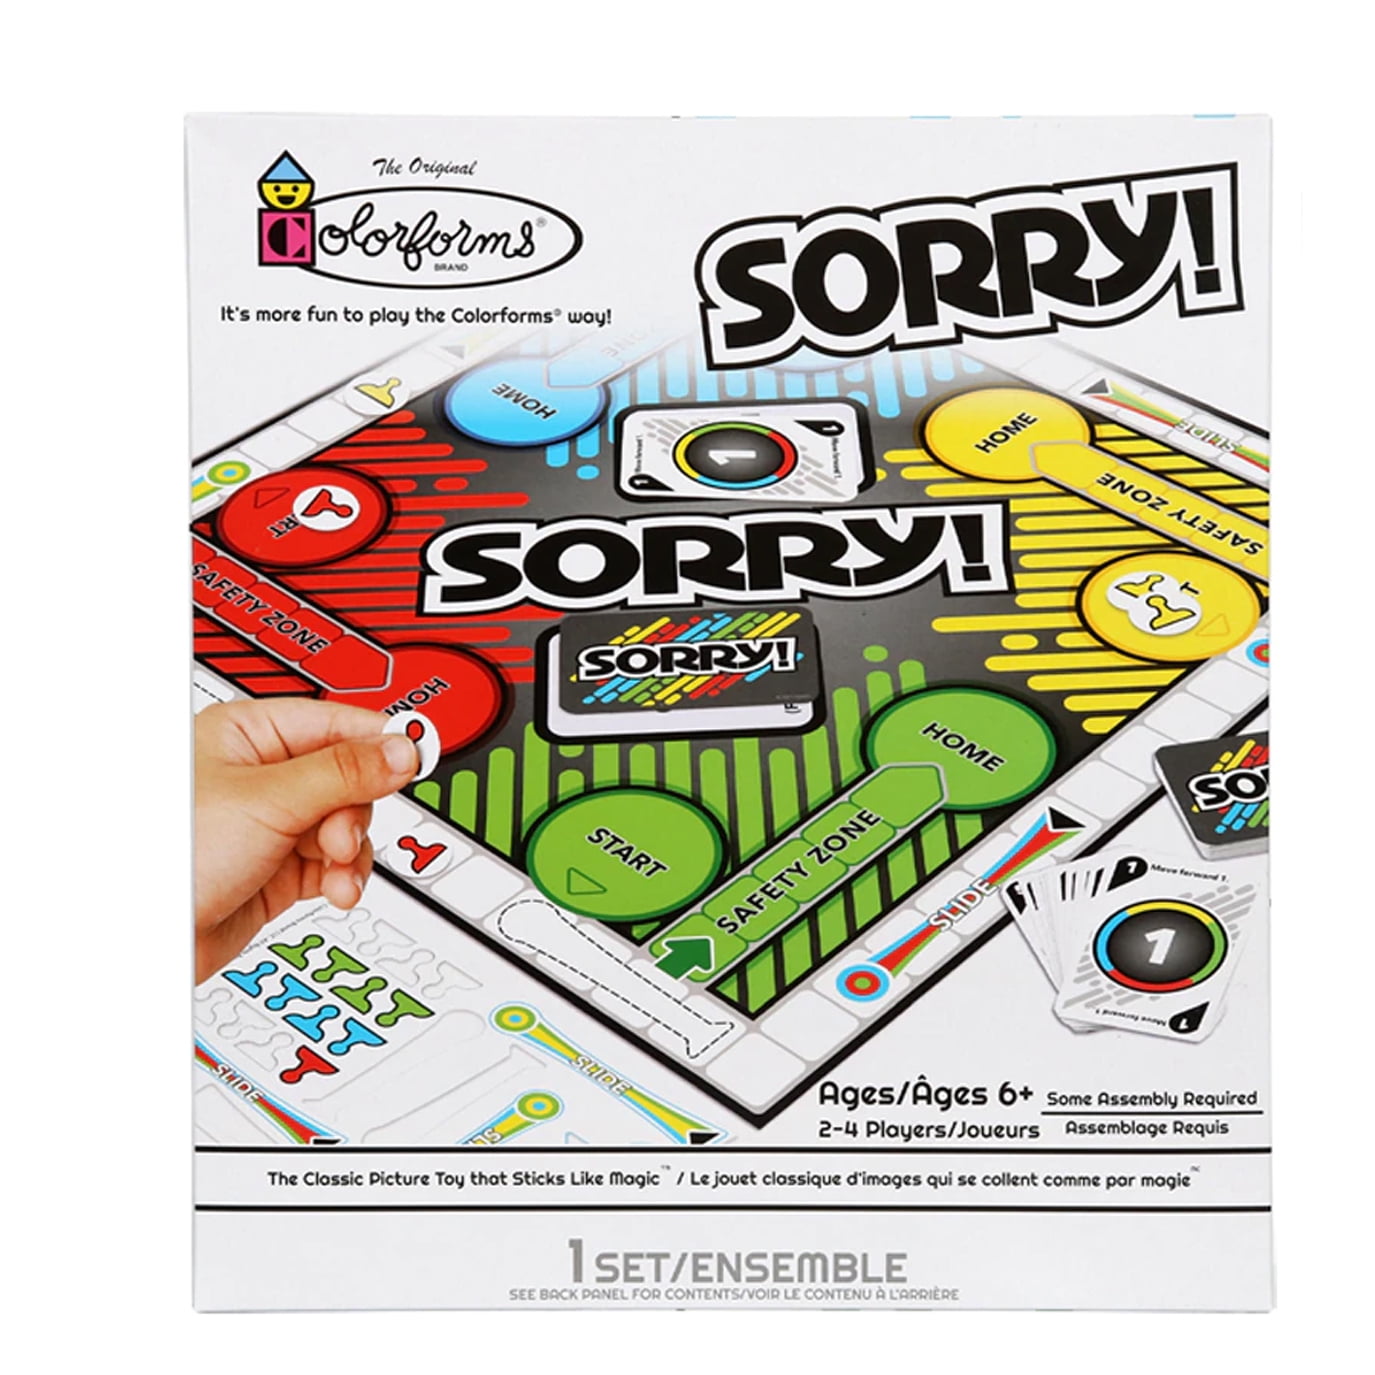 The Original Classic Colorforms -- Fun Retro Re-Stickable Vinyl Design Toy Kids Have Loved for 60 Years, for Ages 5+